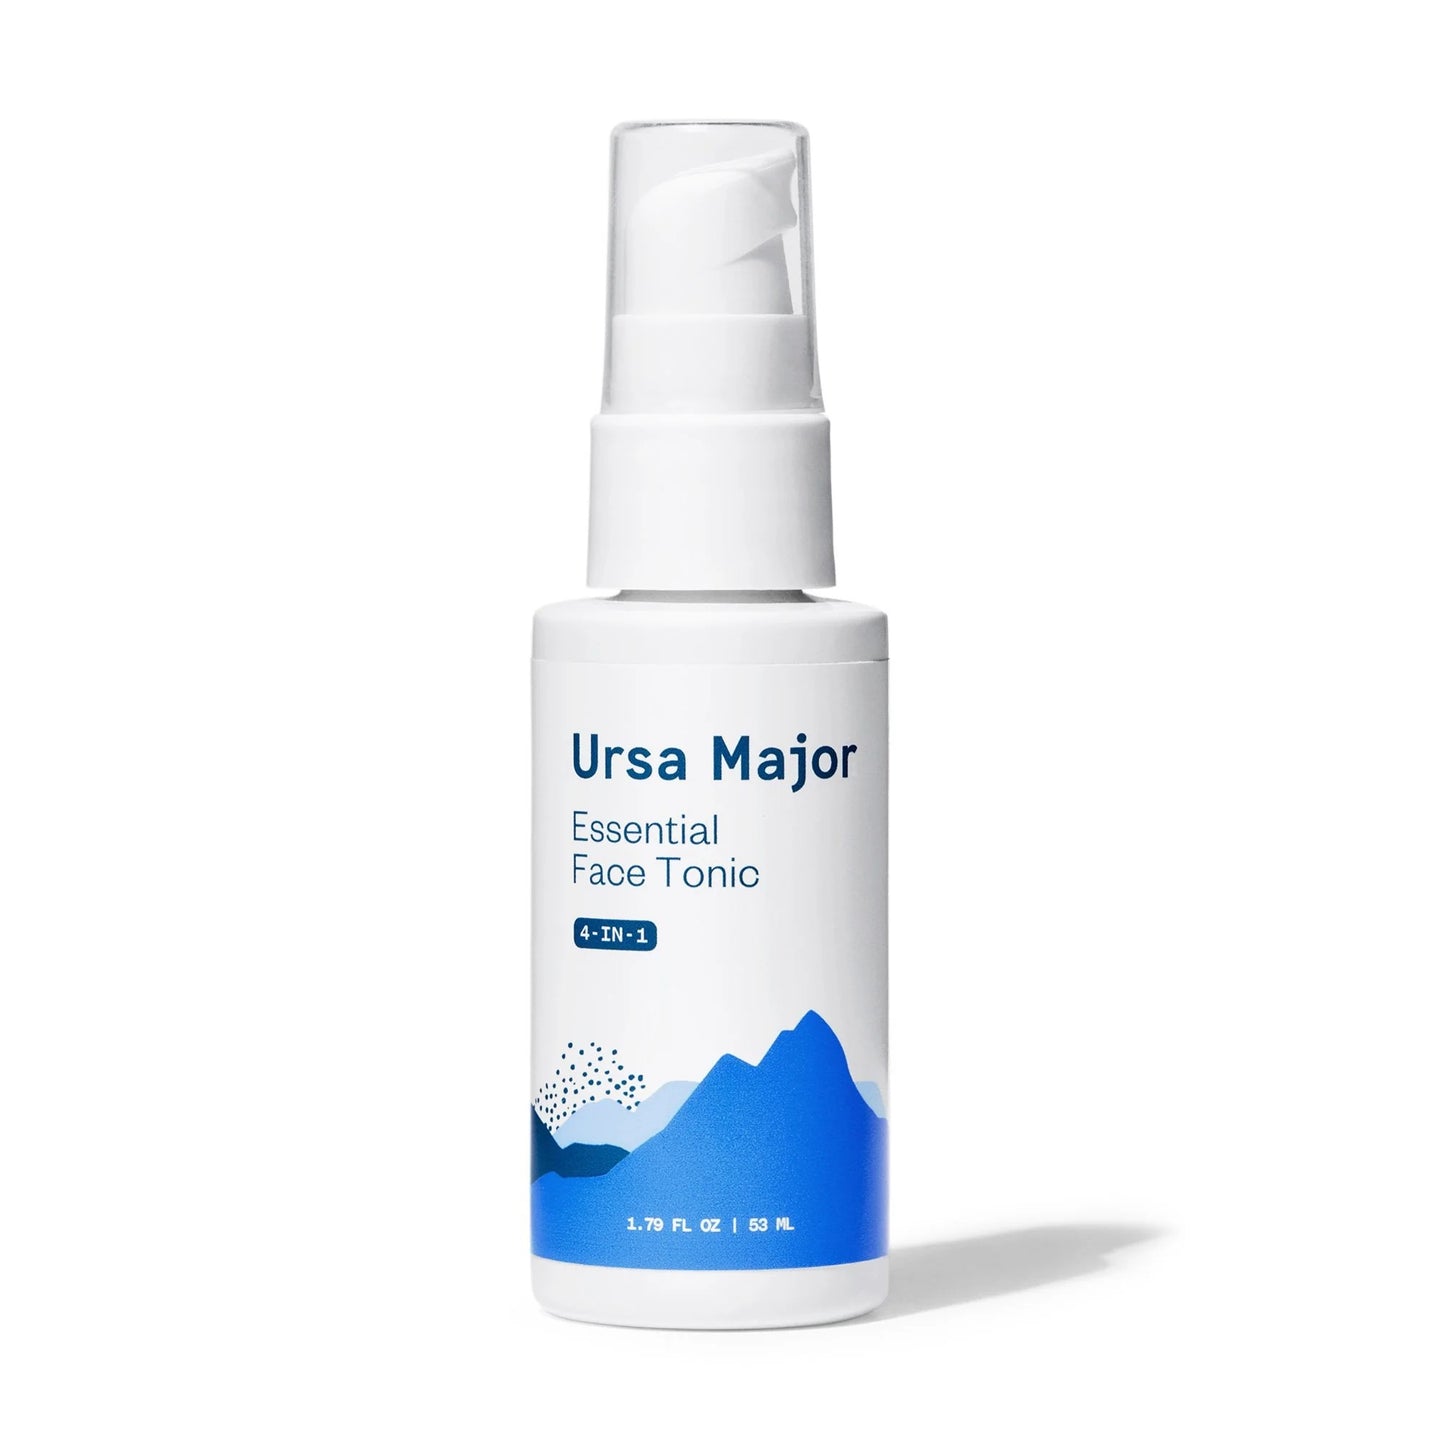 URSA MAJOR 4-in-1 Essential Face Tonic travel size